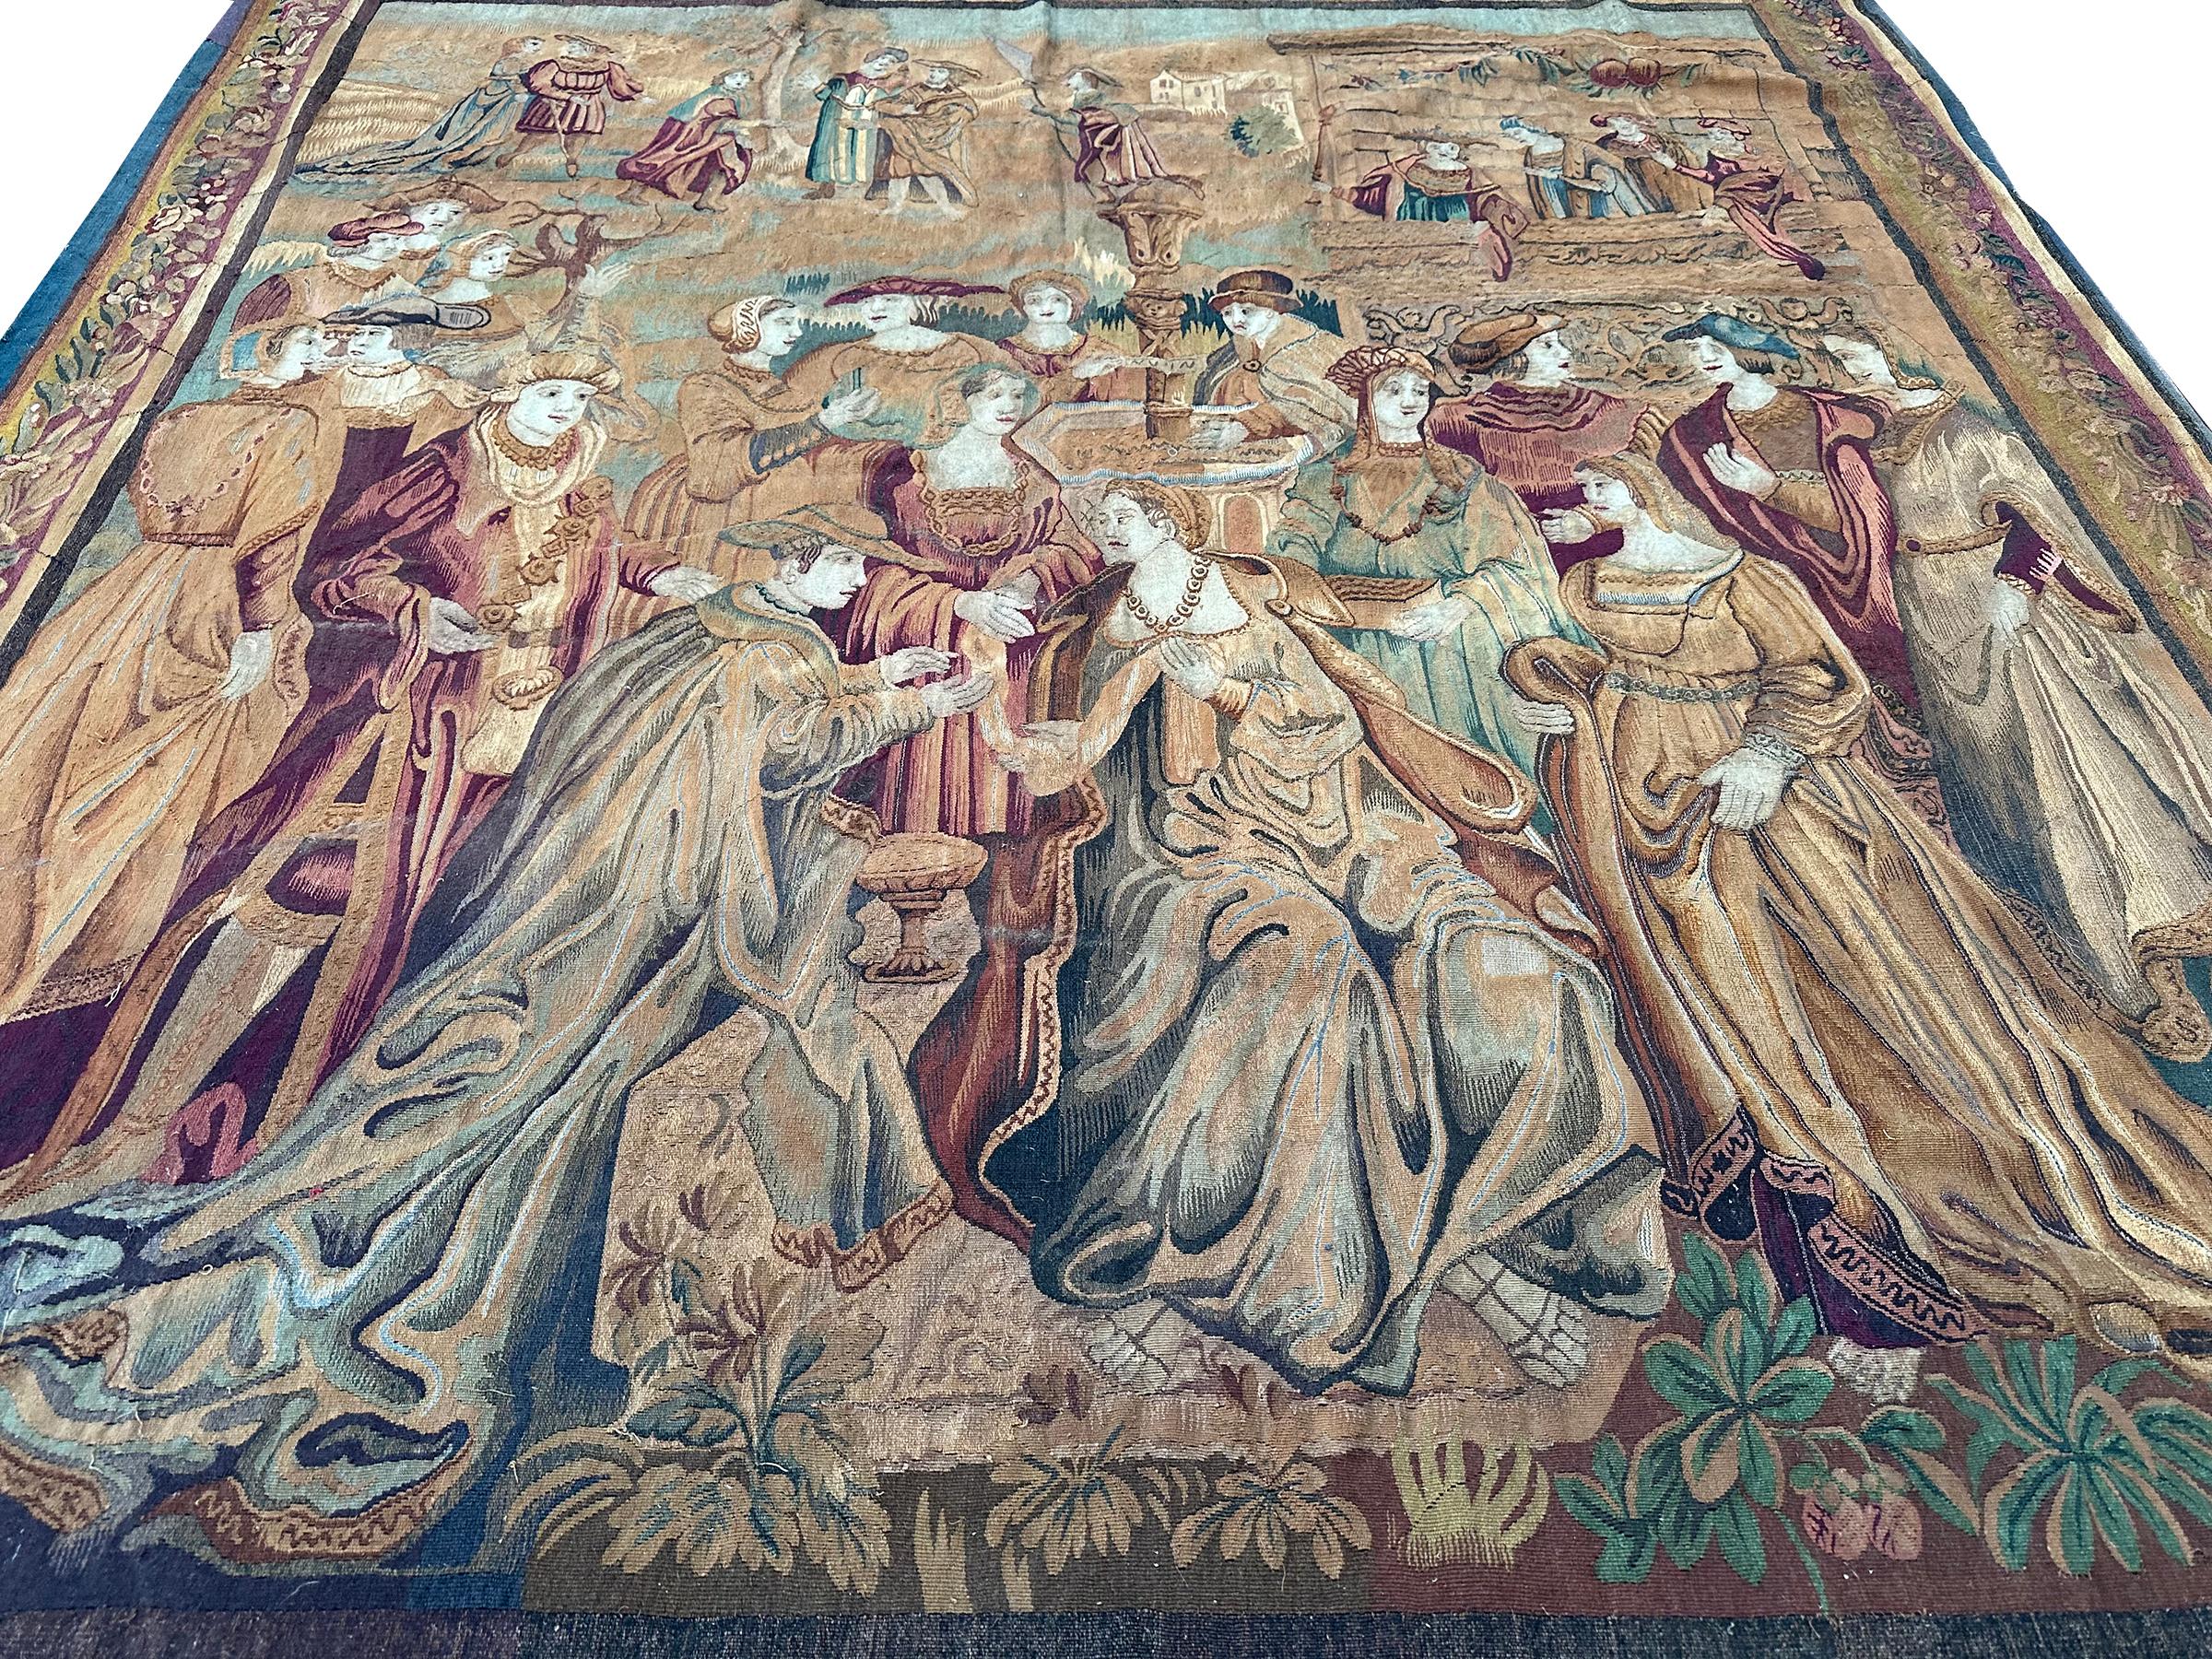 Hand-Woven 1890 Antique French Tapestry Arts & Crafts Ceremonial 8x9 239cm x 257cm For Sale